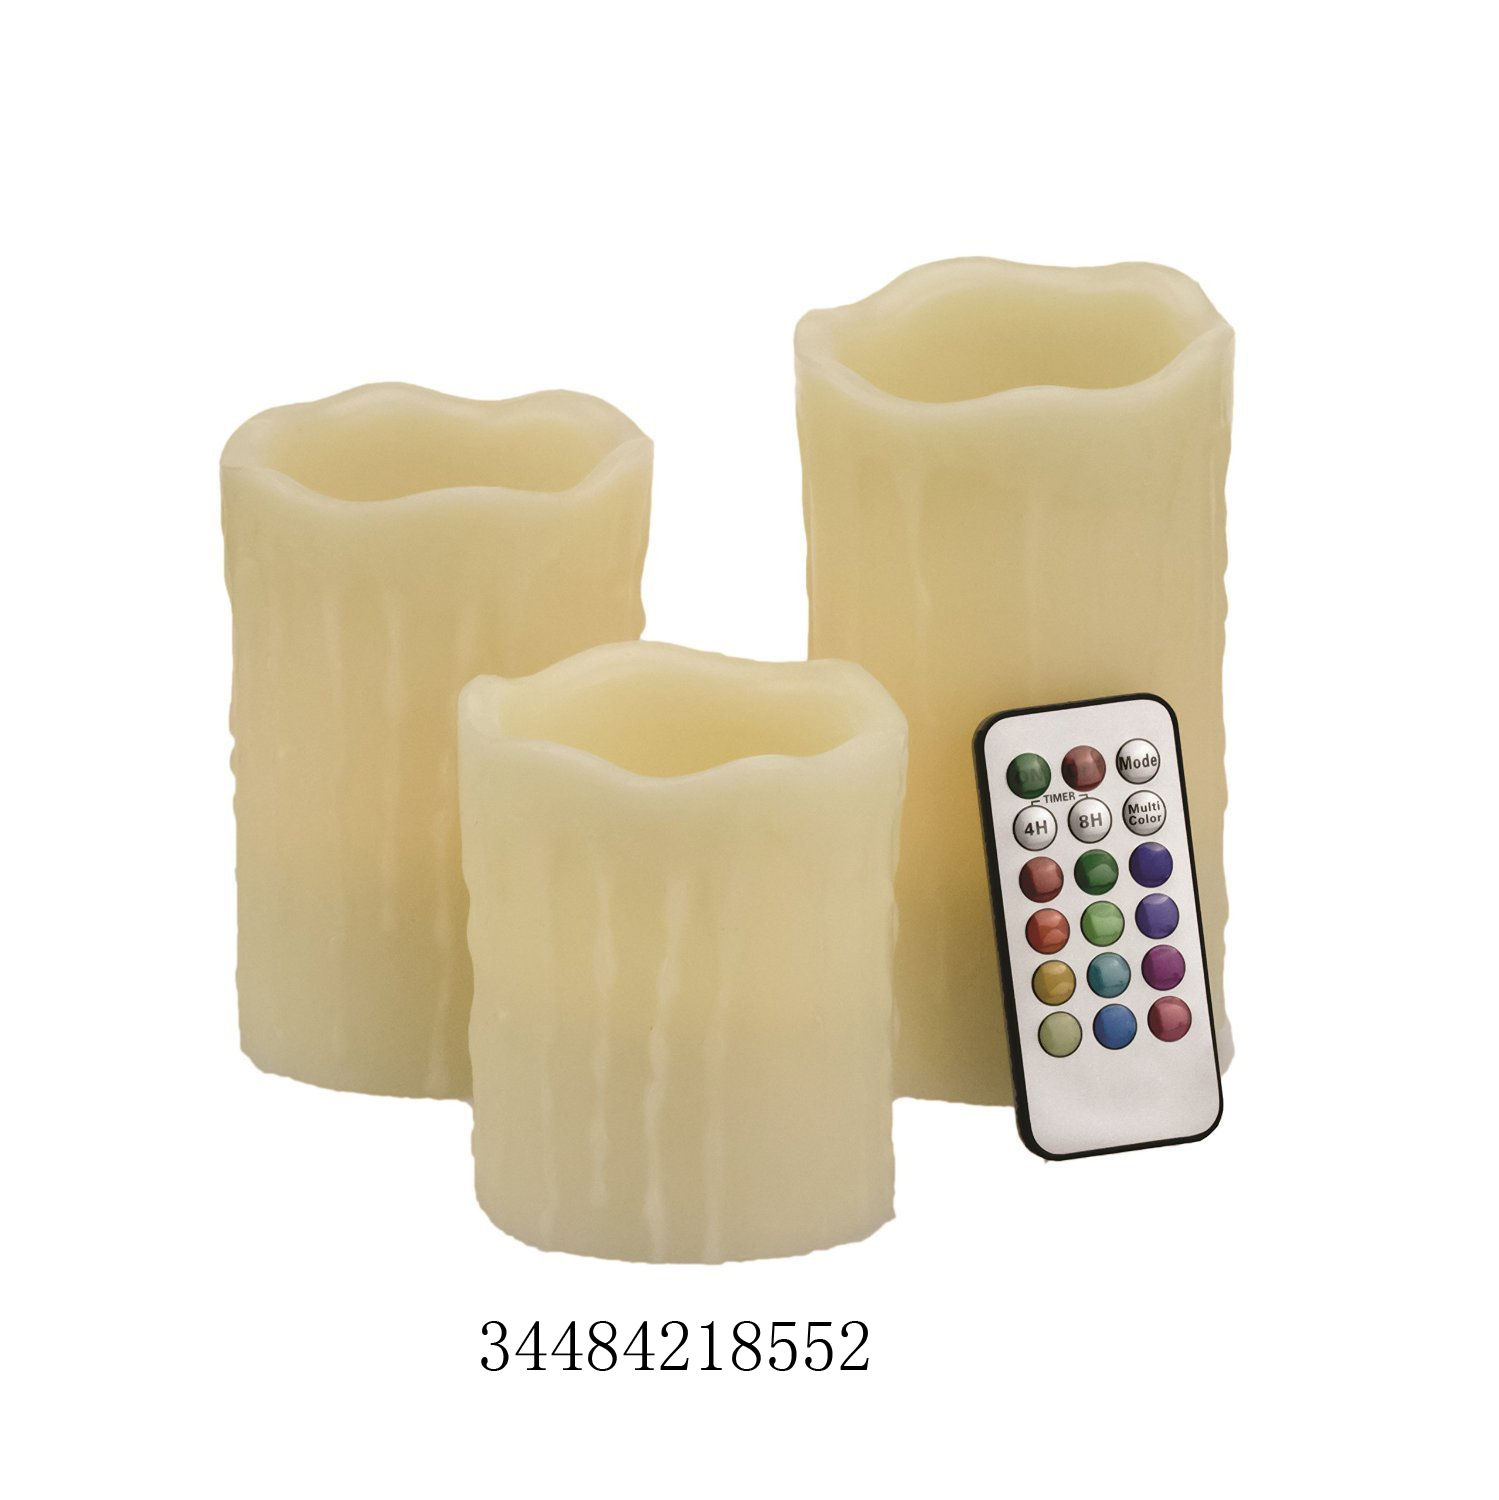 2 Tones Melted Wax Flameless Color Change LED Candle With Remote Control  CA8111RB